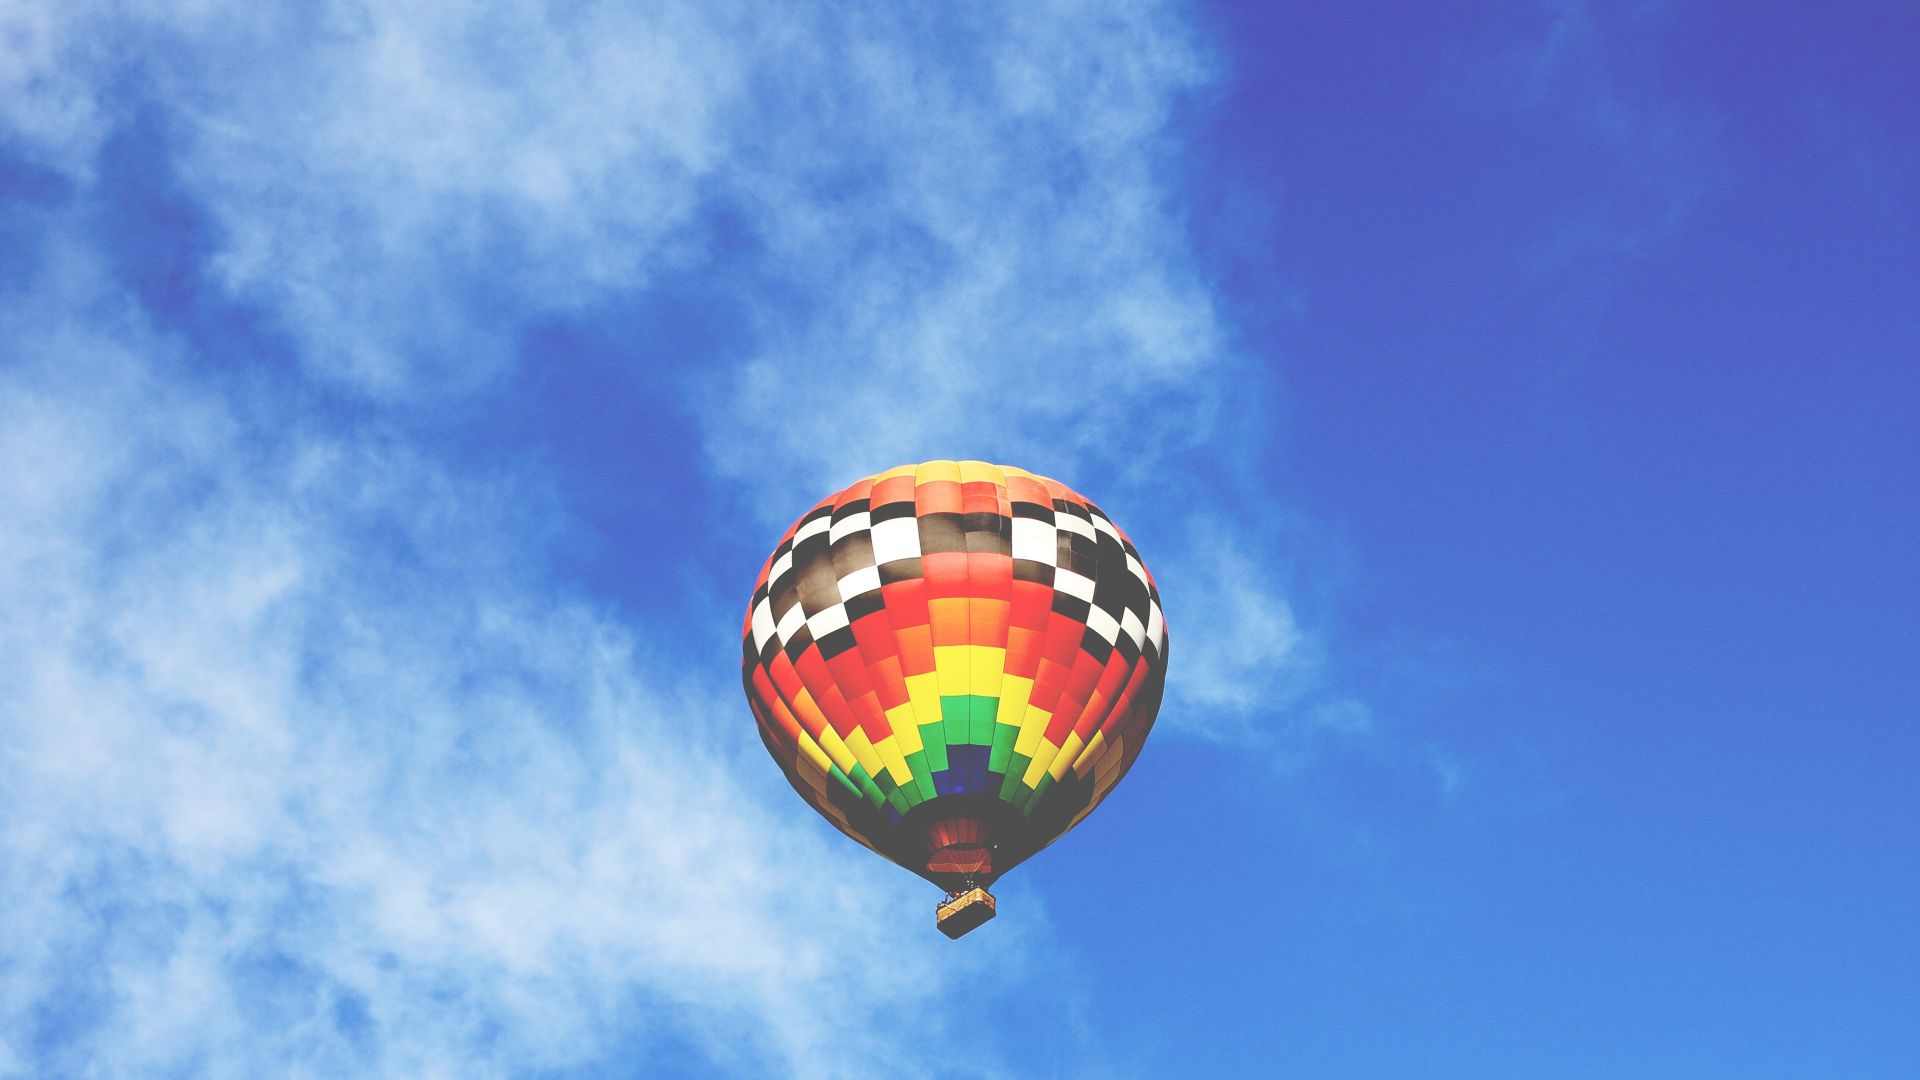 Desktop Wallpaper Hot Air Balloon In Sky, Hd Image, Picture, Background,  T3curb